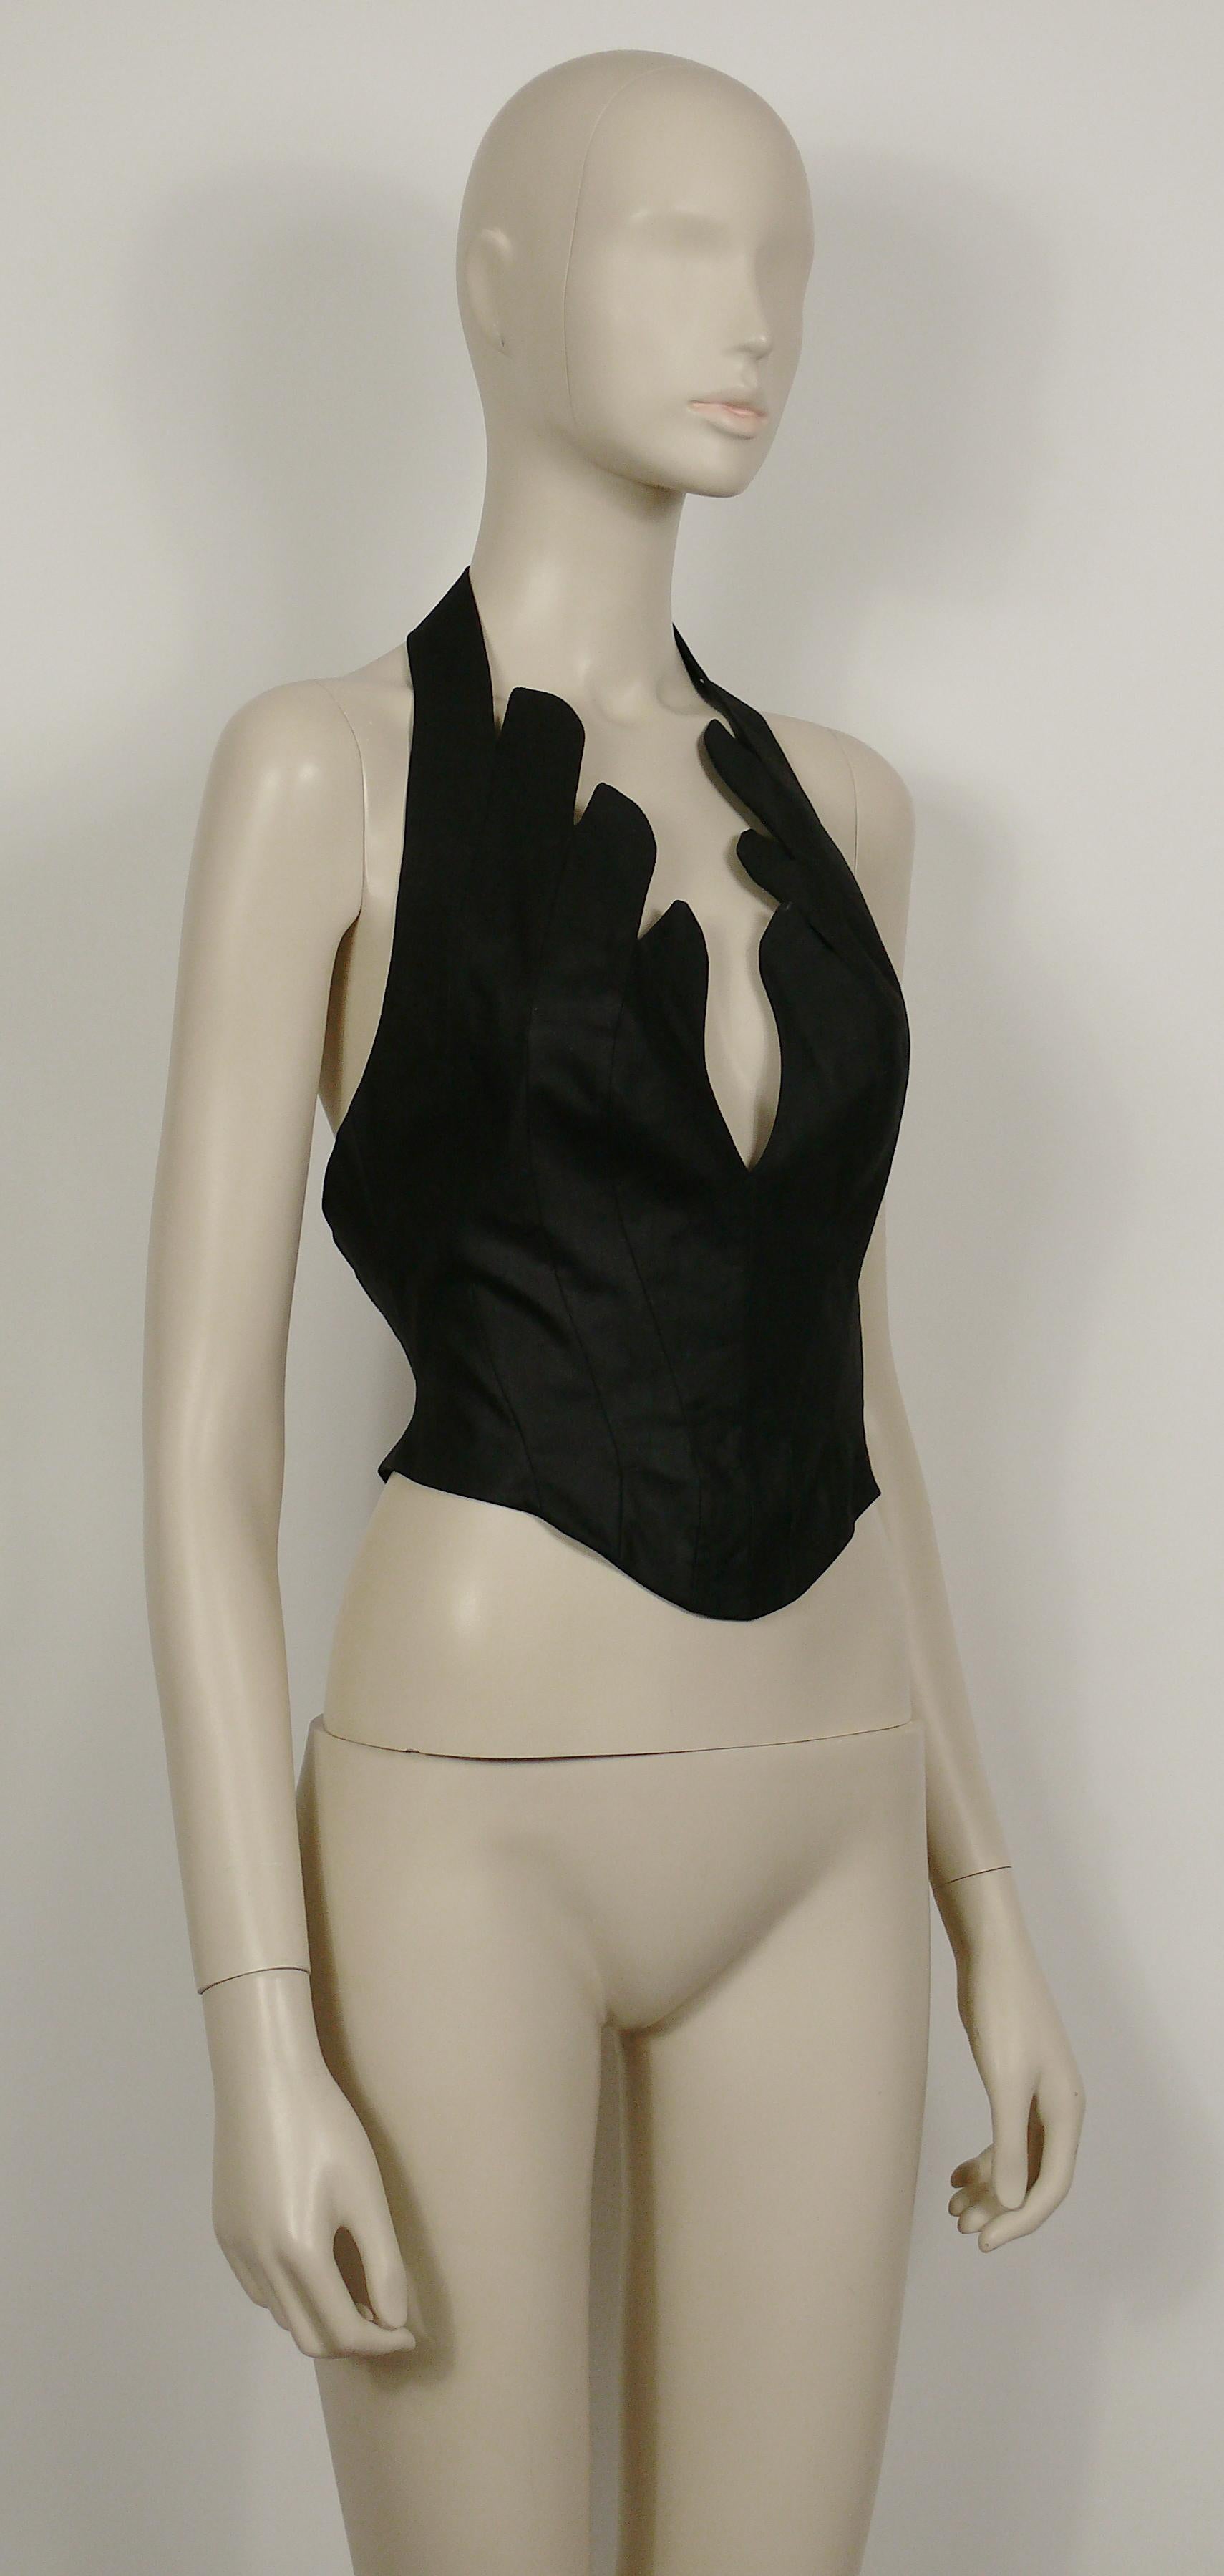 THIERRY MUGLER vintage iconic black coated cotton bustier corset with scalloped edges.

Snap button closure on the halter strap.
Hook and eye loop closure at the back.

Label reads THIERRY MUGLER Paris.
Made in France.

Size tag reads : 40.
Please